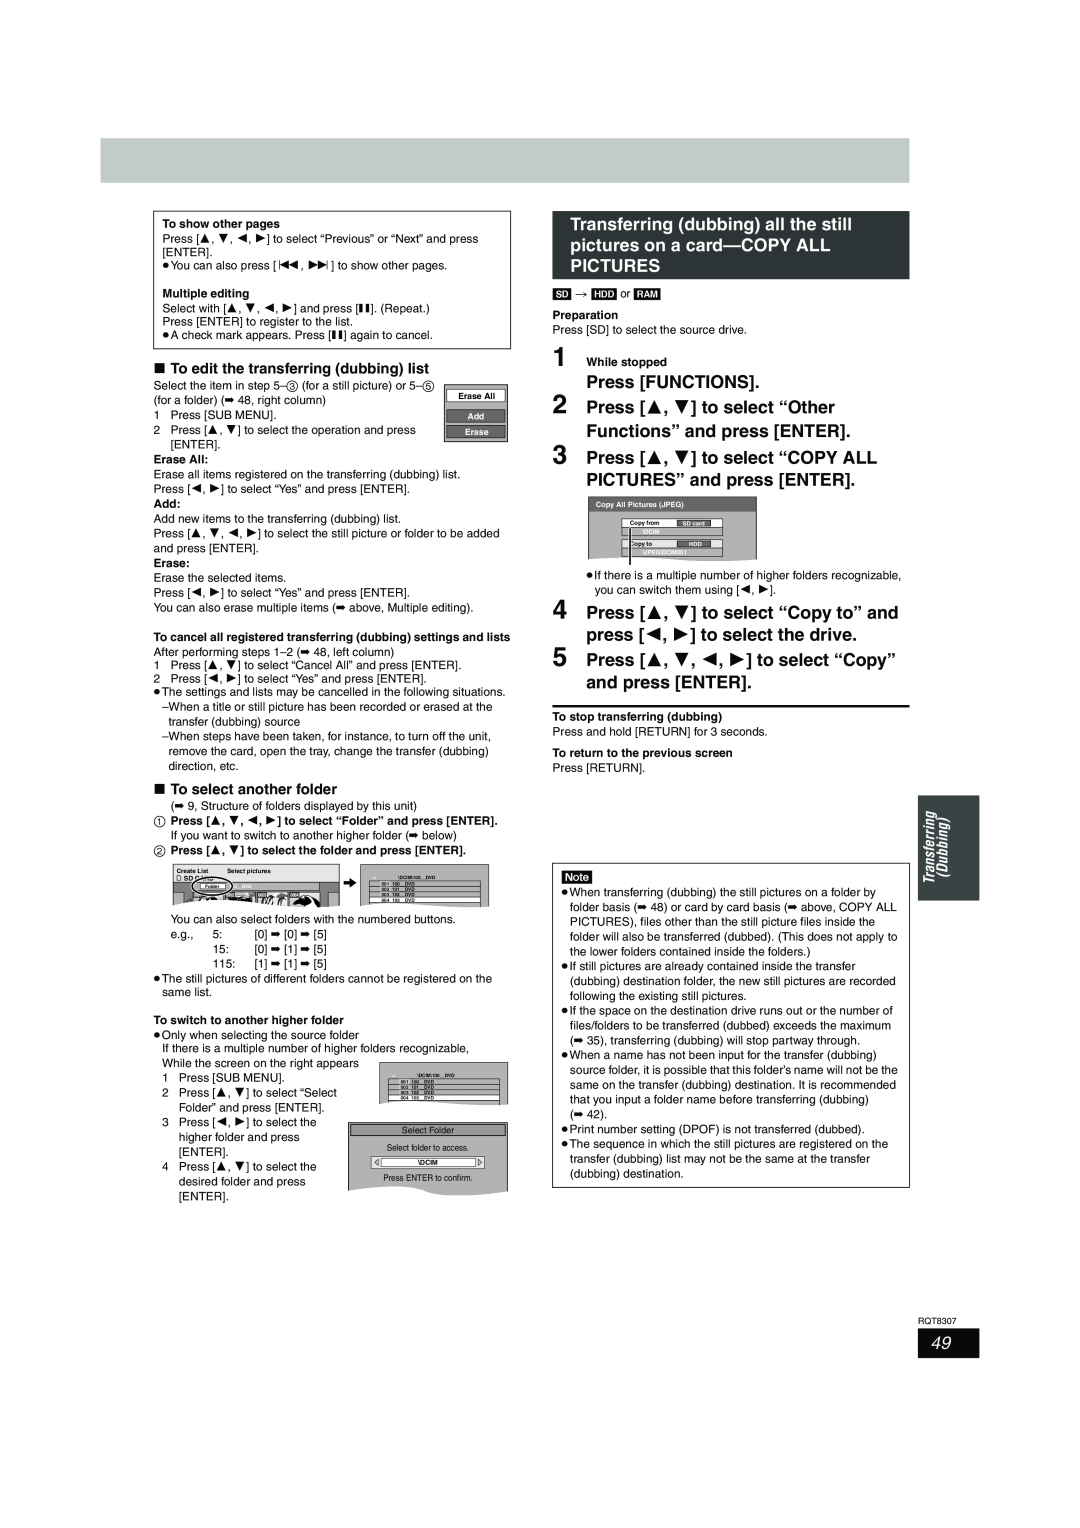 Panasonic DMR-EH60 warranty Functions” and press ENTER 3 Press 3, 4 to select “COPY ALL, PICTURES” and press ENTER 